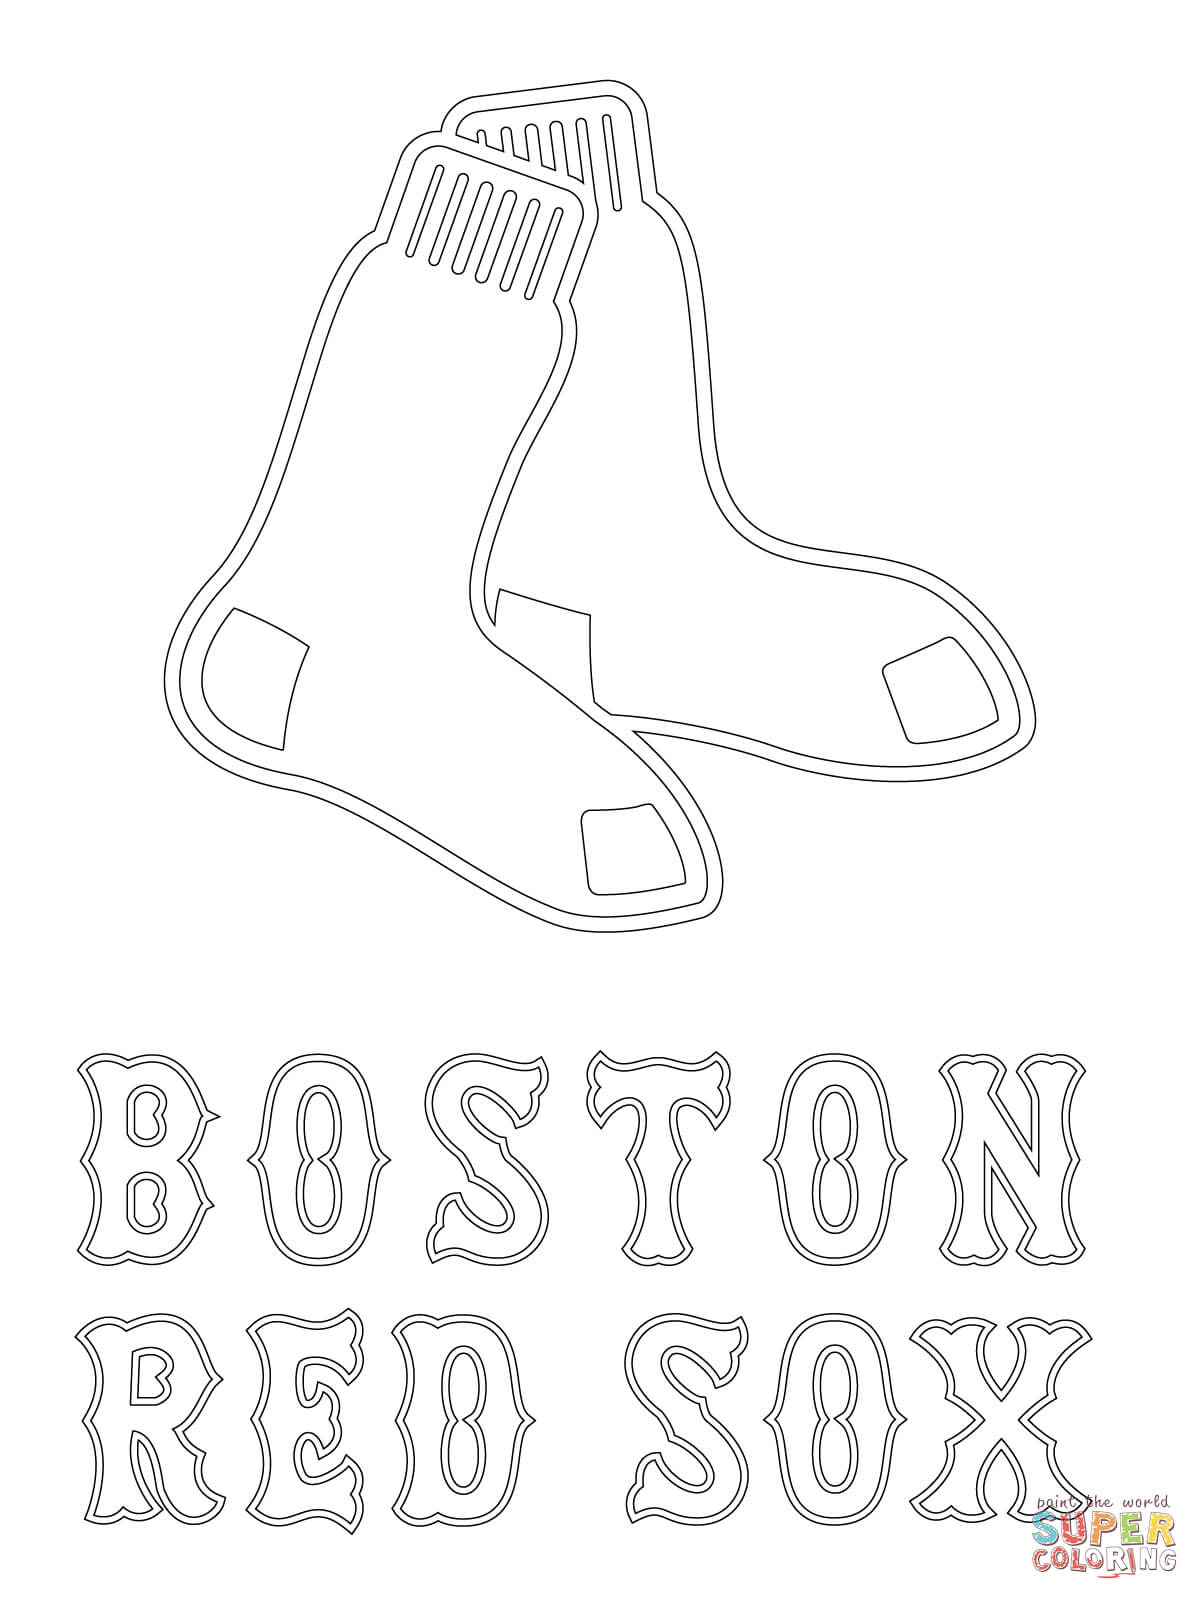 Boston red sox logo coloring page free printable coloring pages